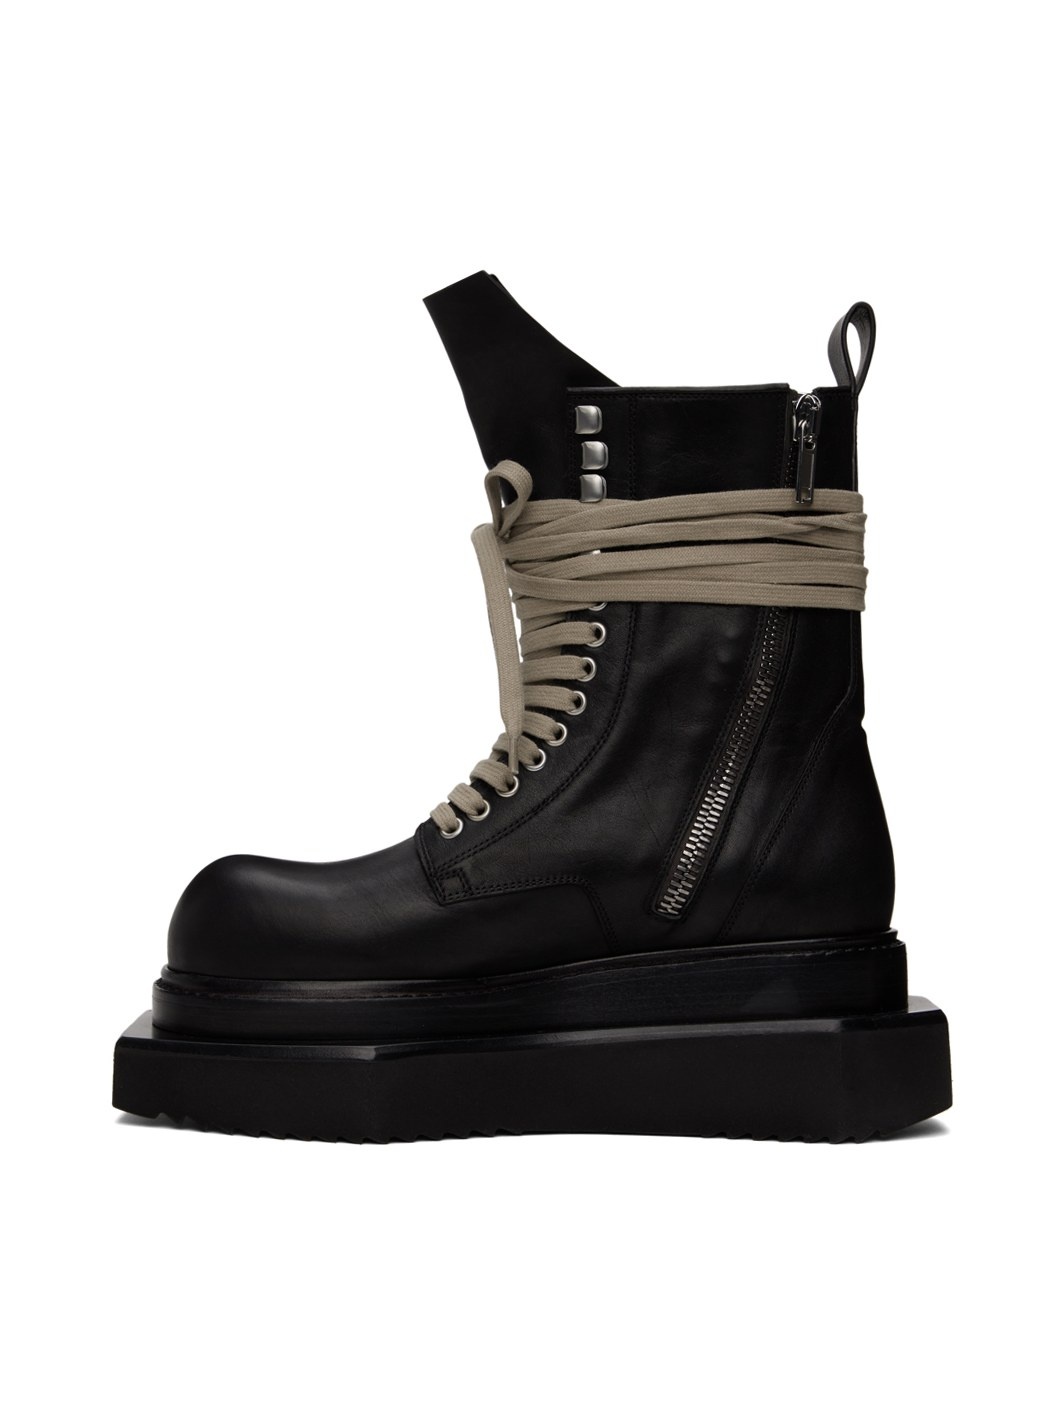 Black Laceup Turbo Cyclops Boots - 3